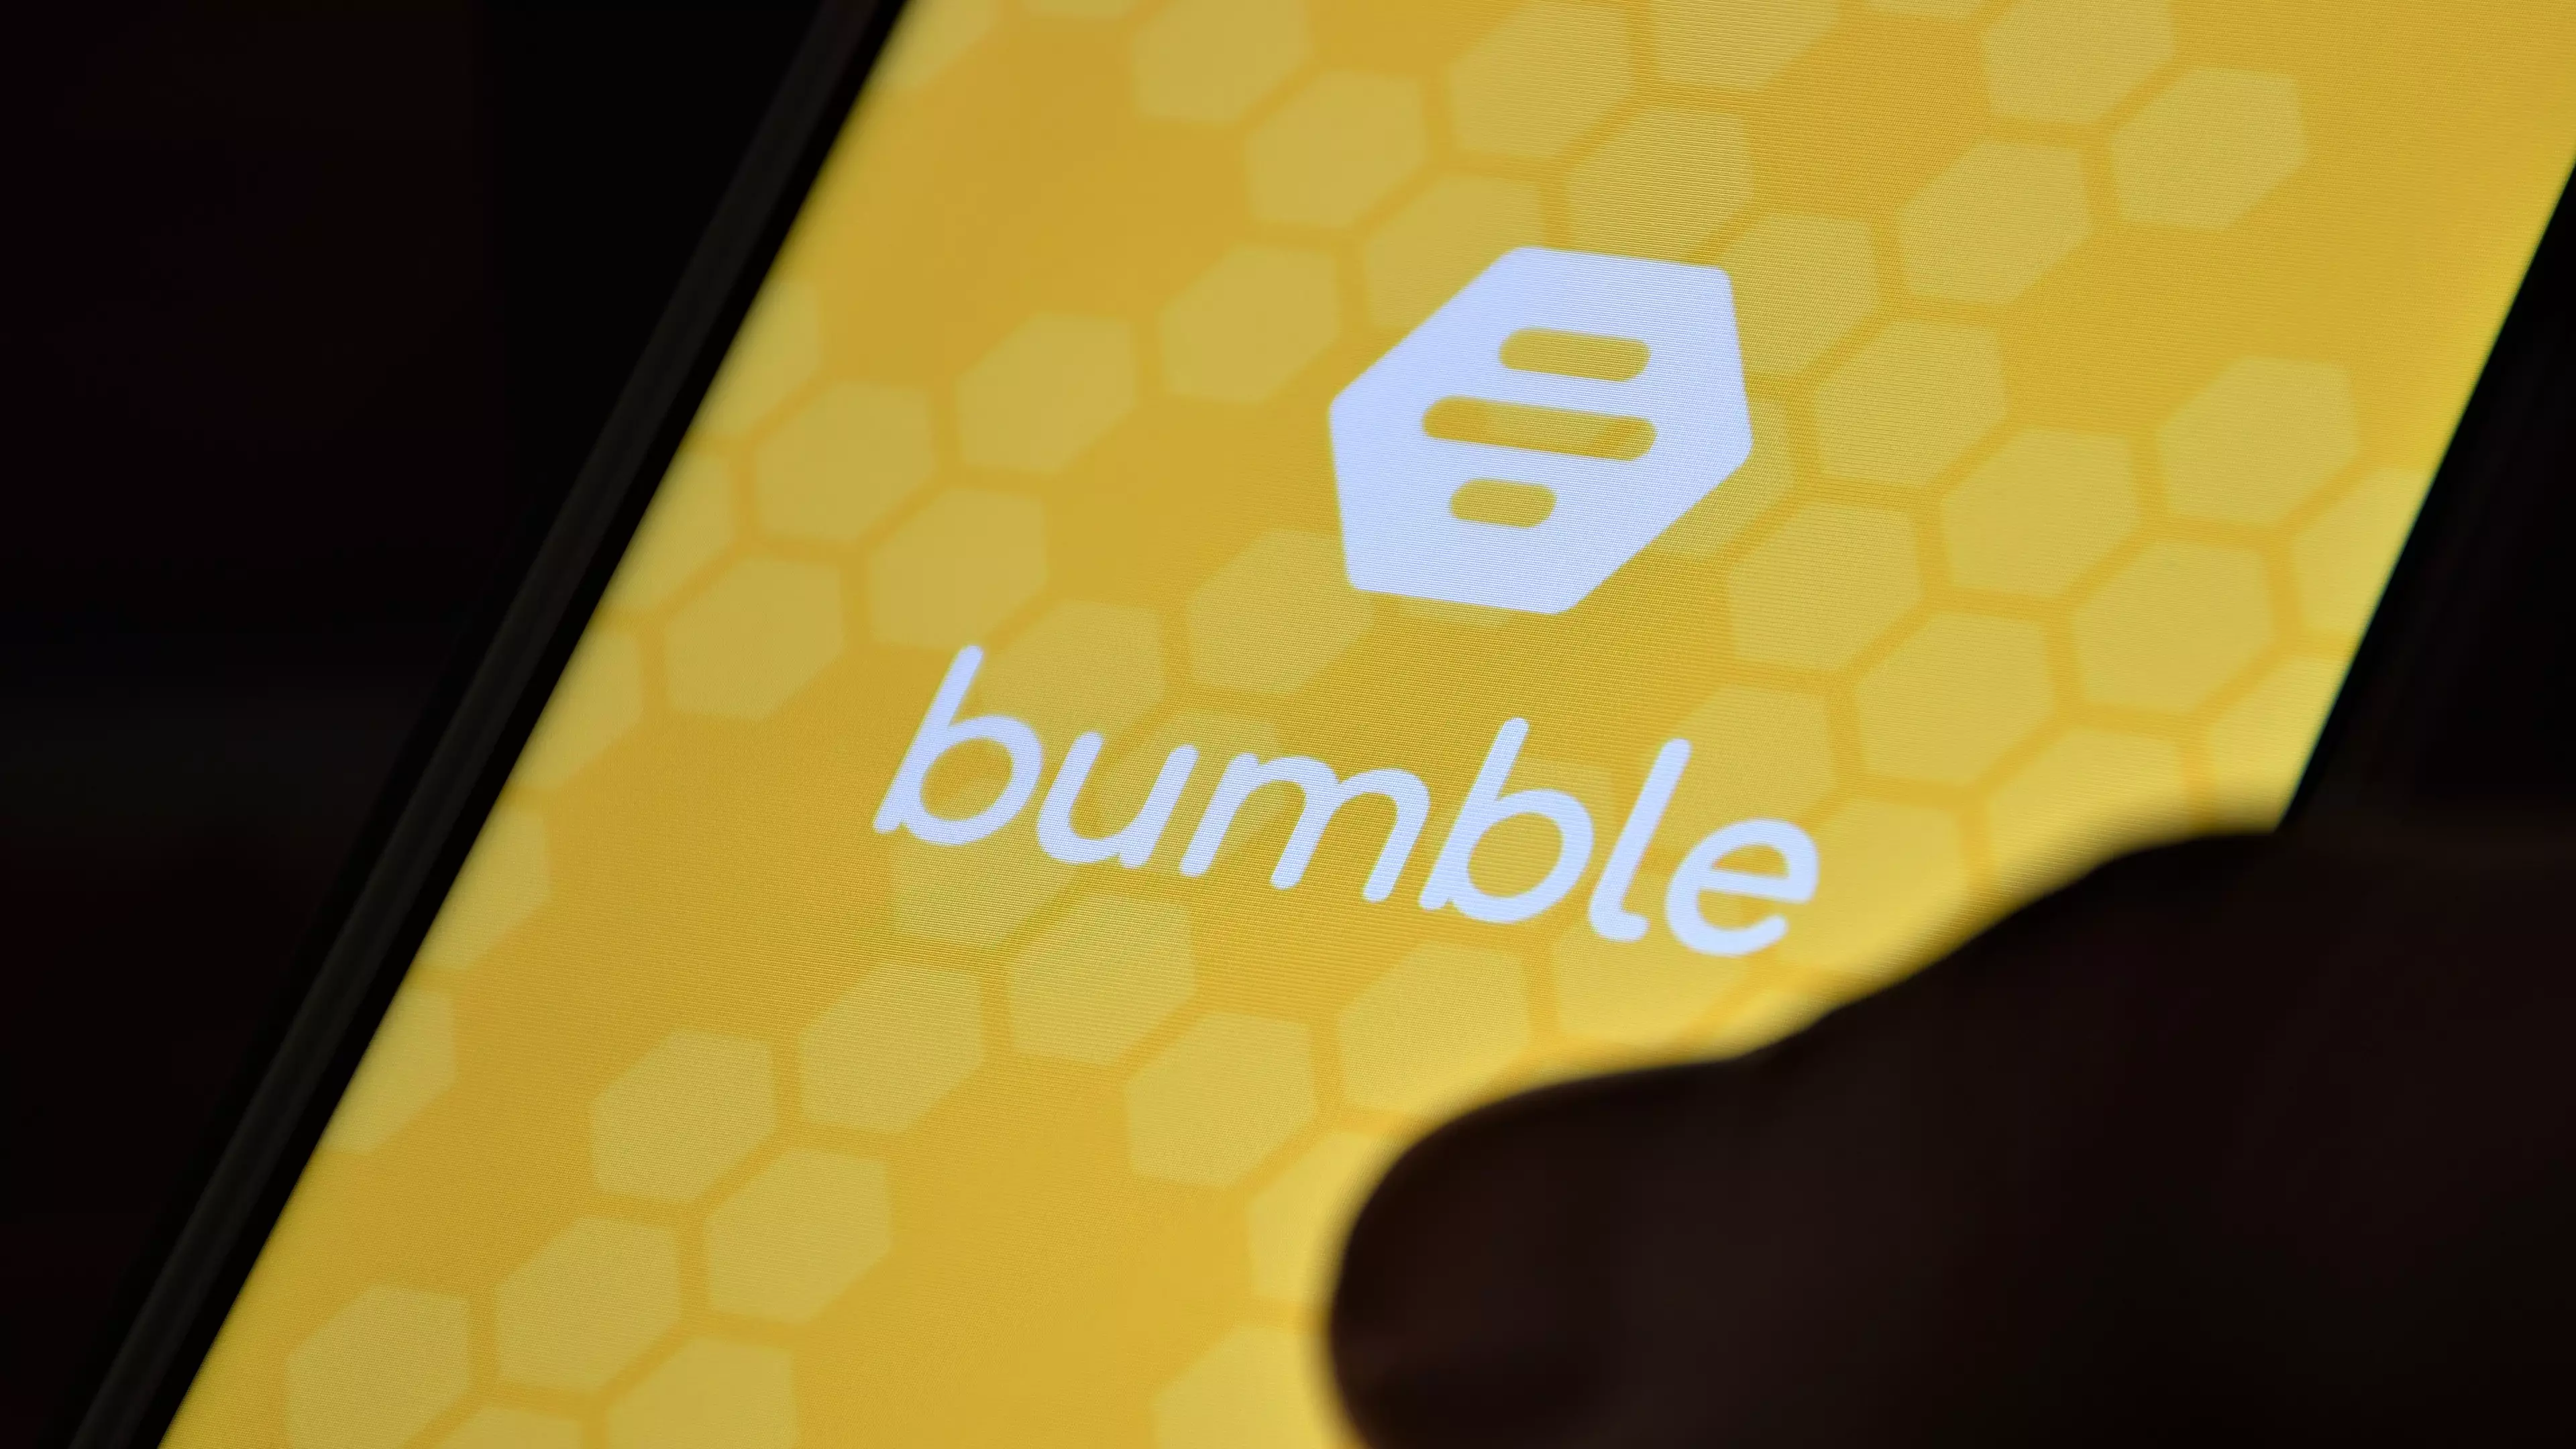 Bumble Co-Founder Becomes World’s Youngest Self-Made Female Billionaire Aged 31